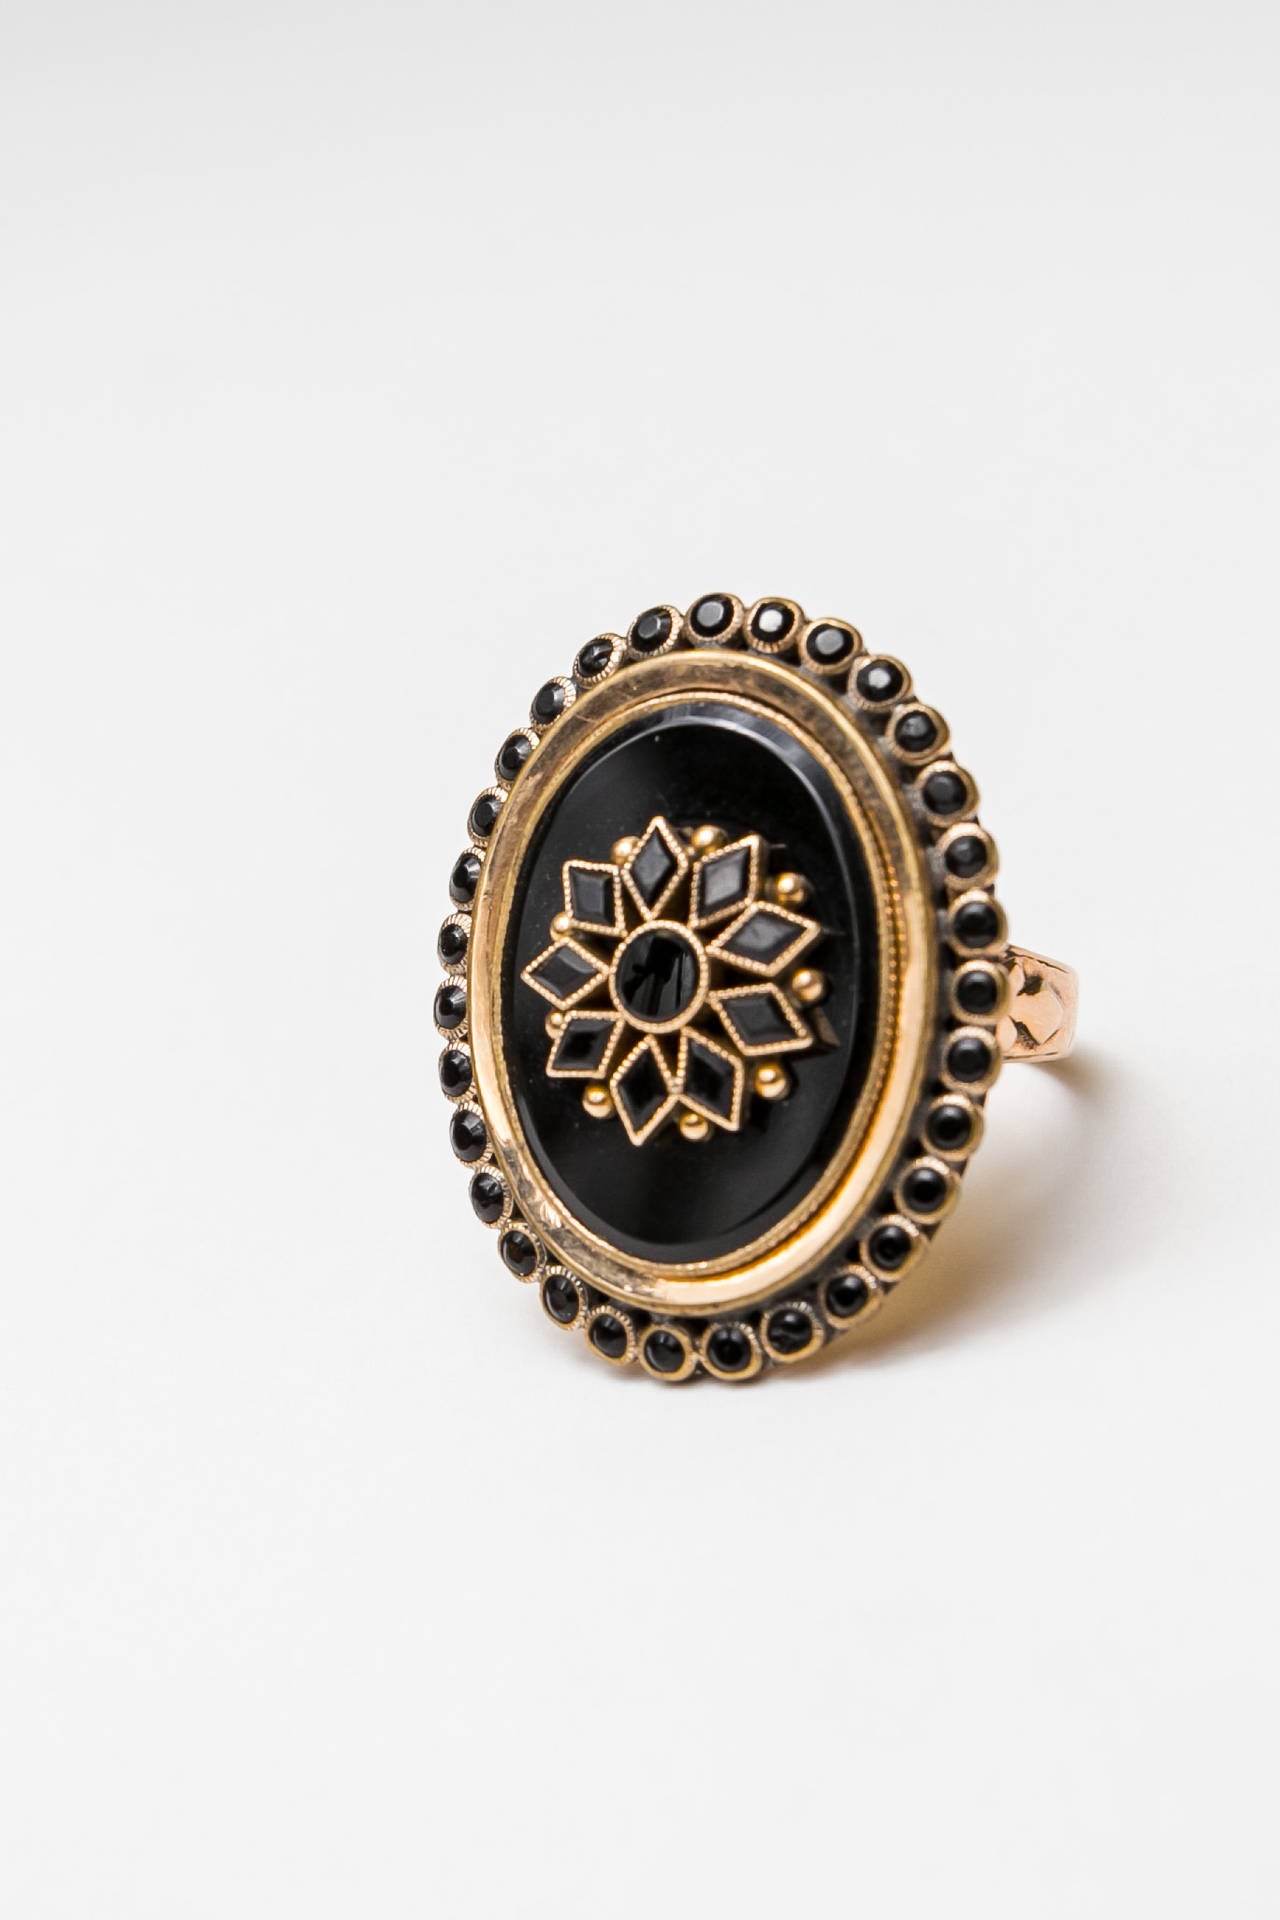 Victorian Gold and Onyx Snuff or Poison Ring 1